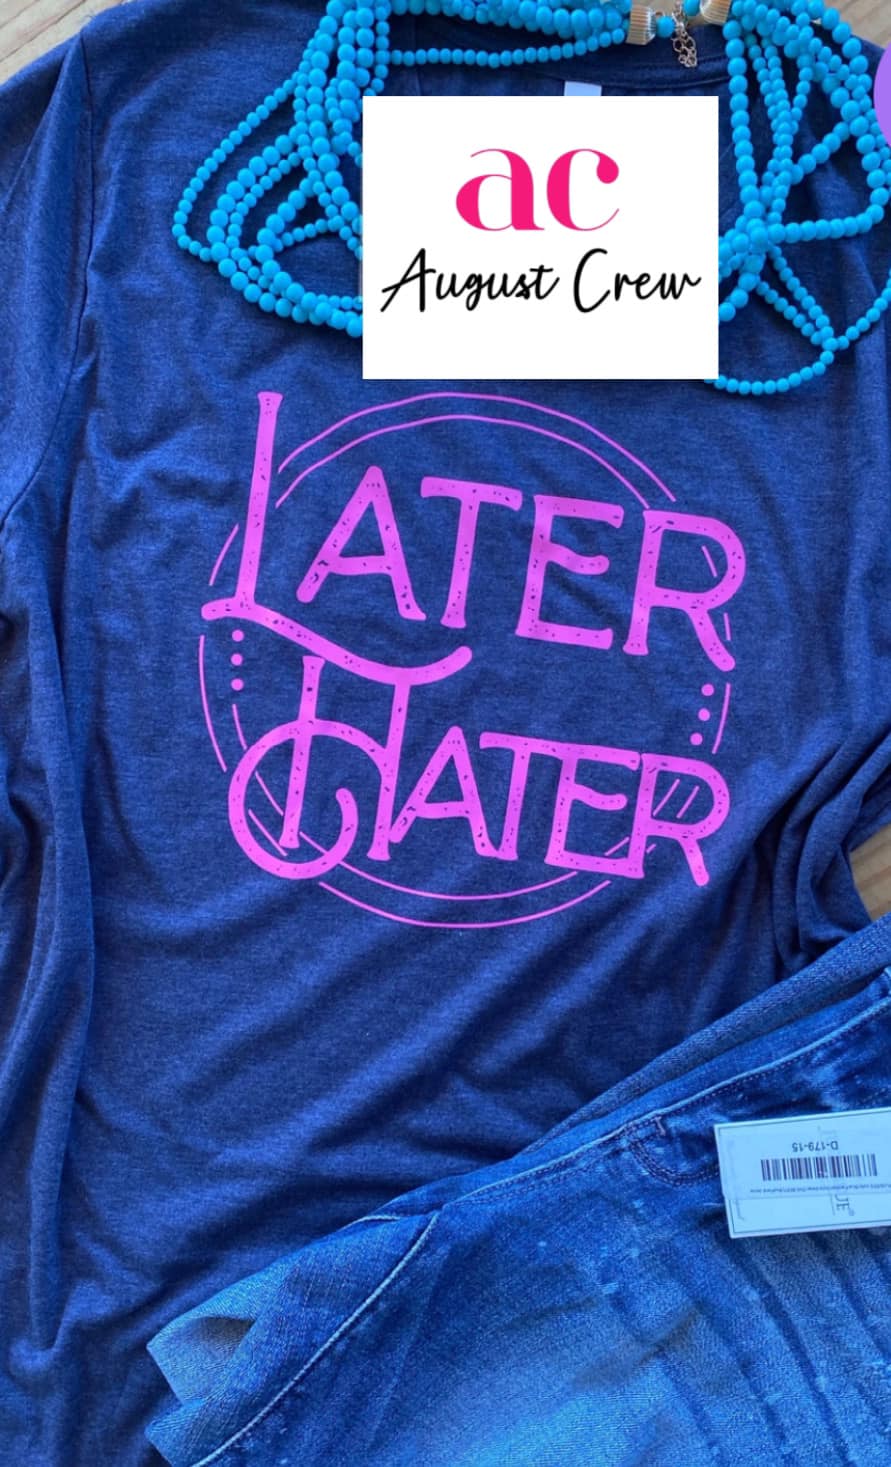 Later Hater |T-Shirt